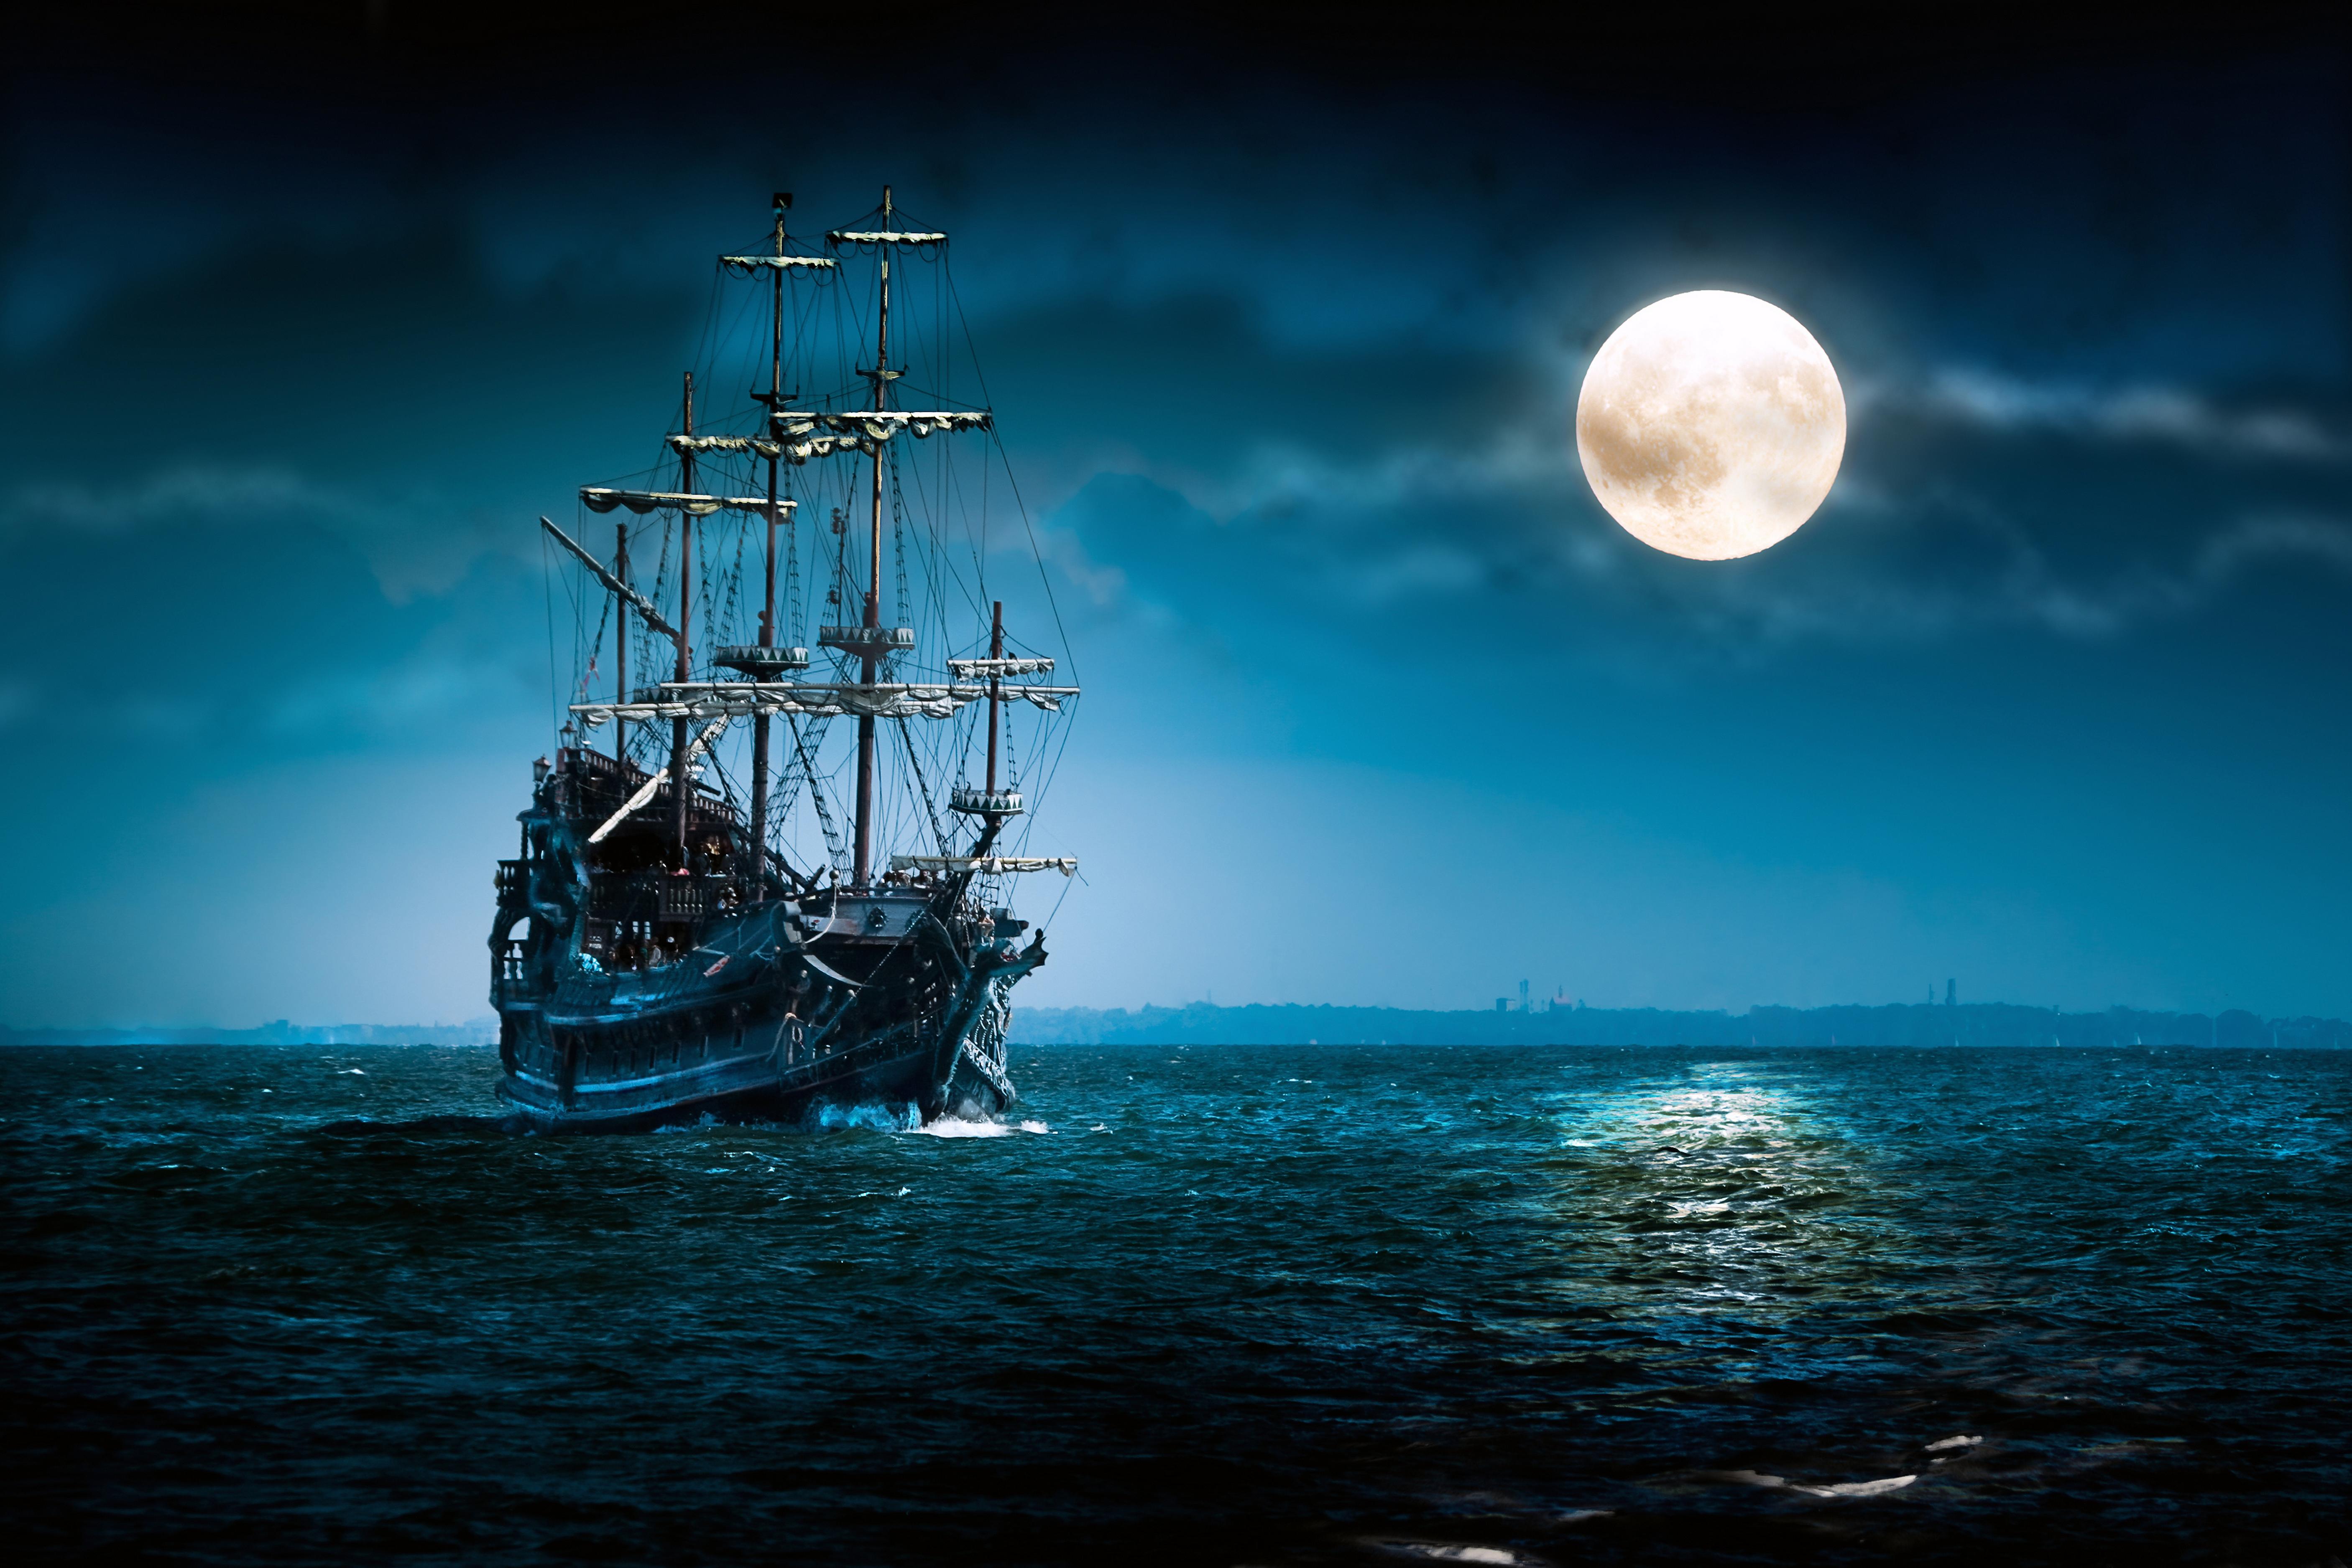 One beautiful pirate ship sailing in blue ocean by the bright full